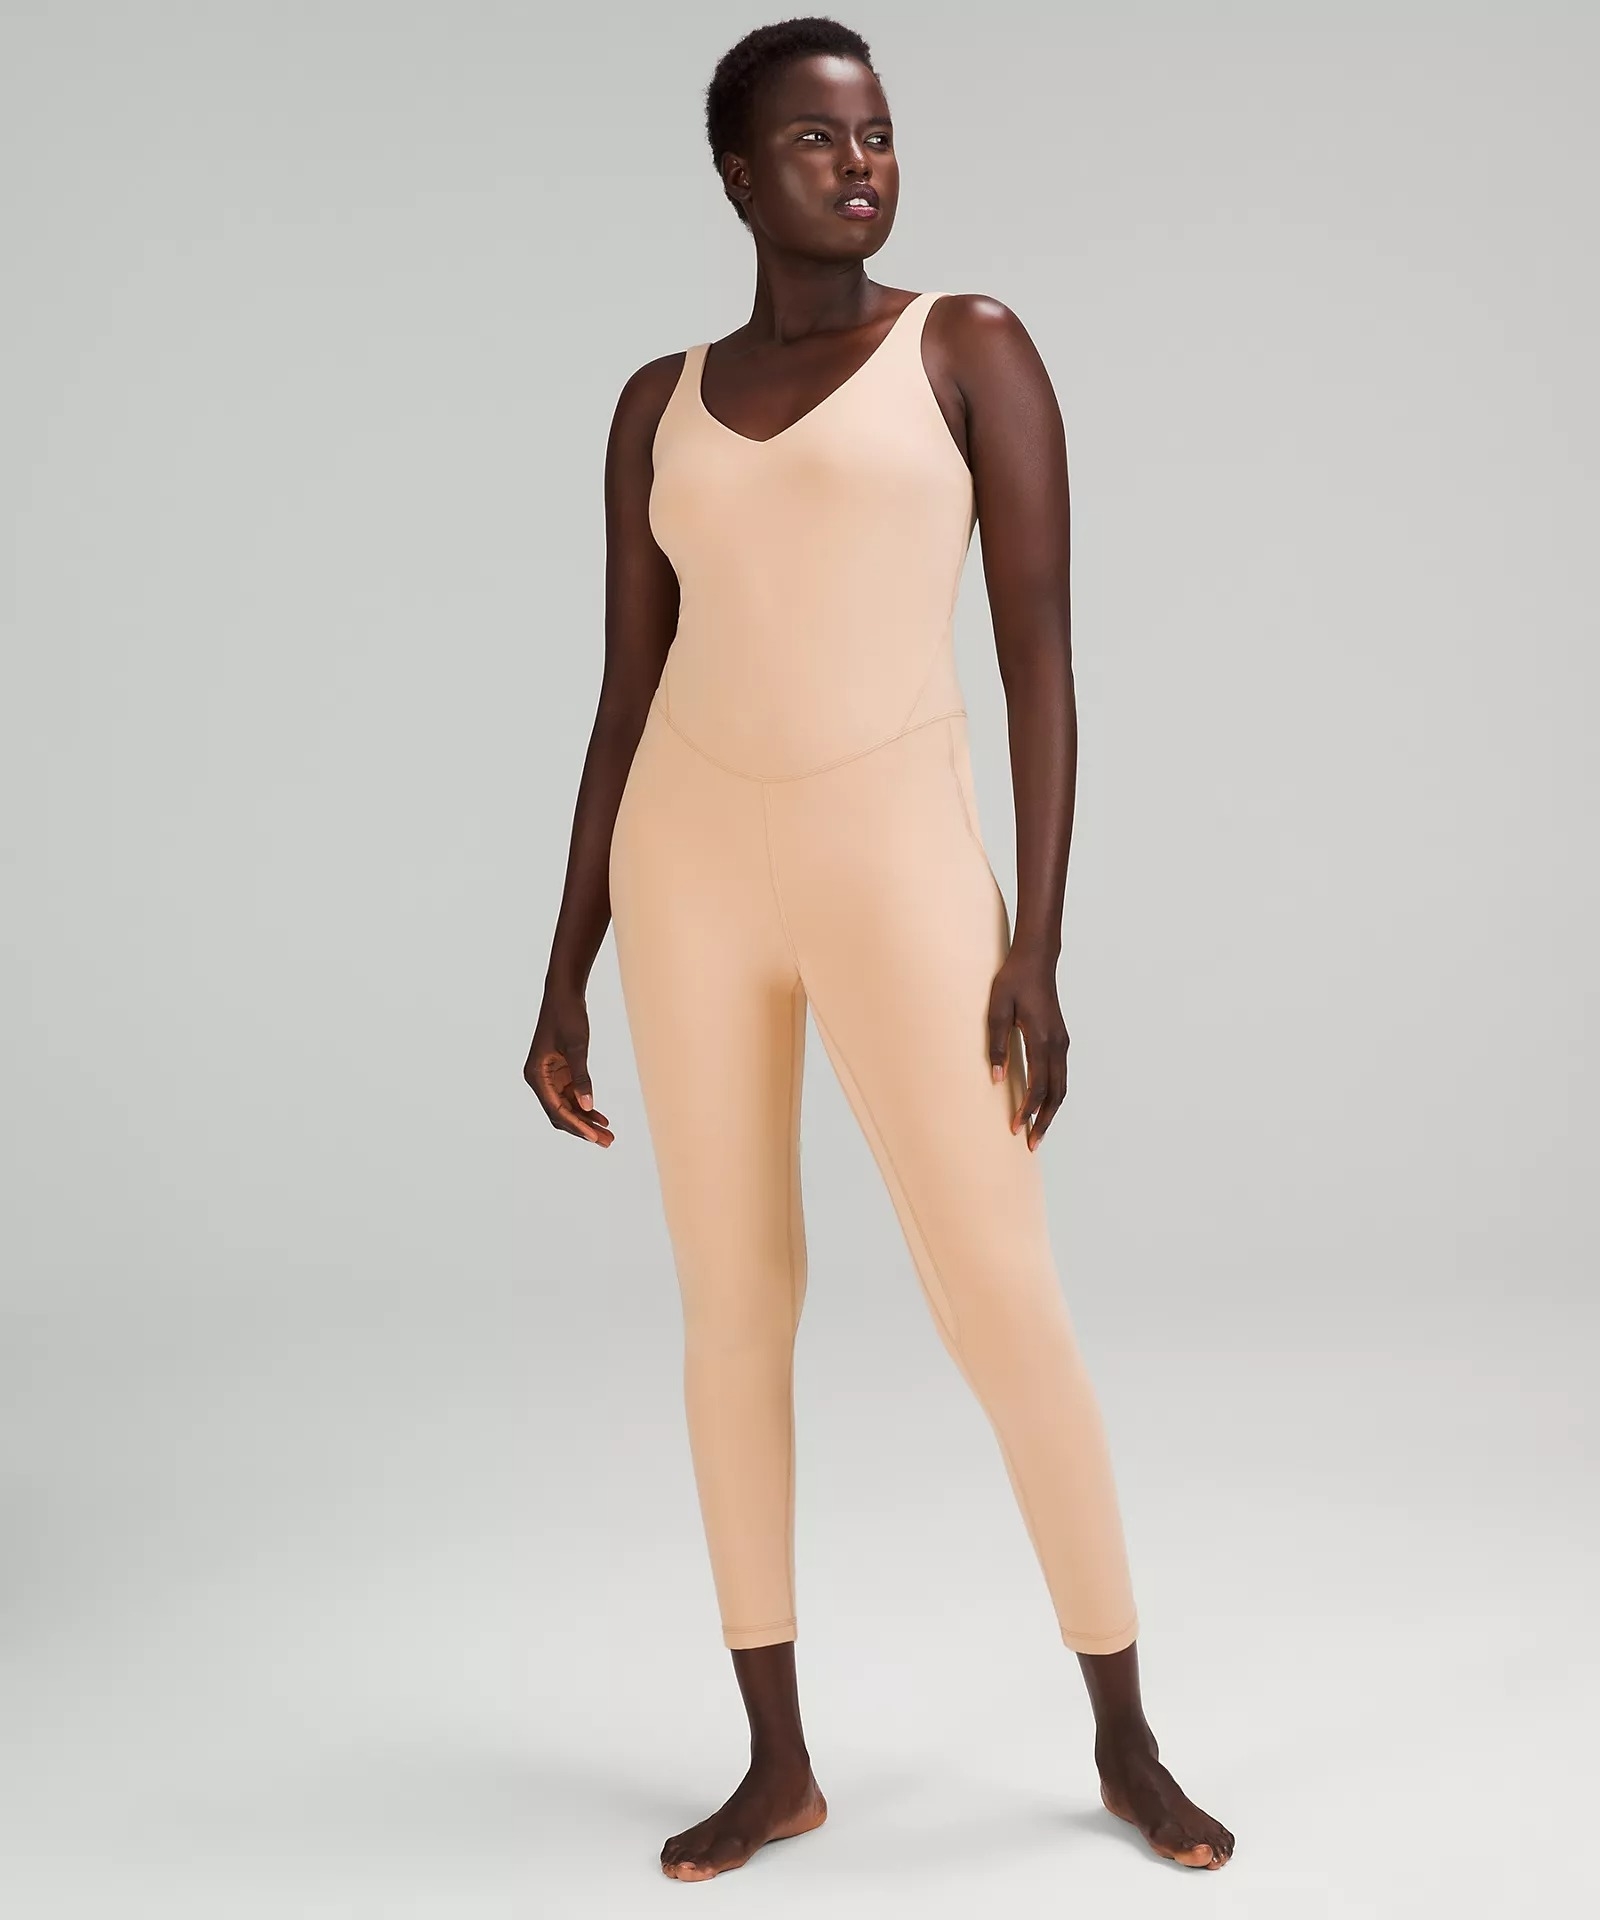 model wearing the cream colored bodysuit